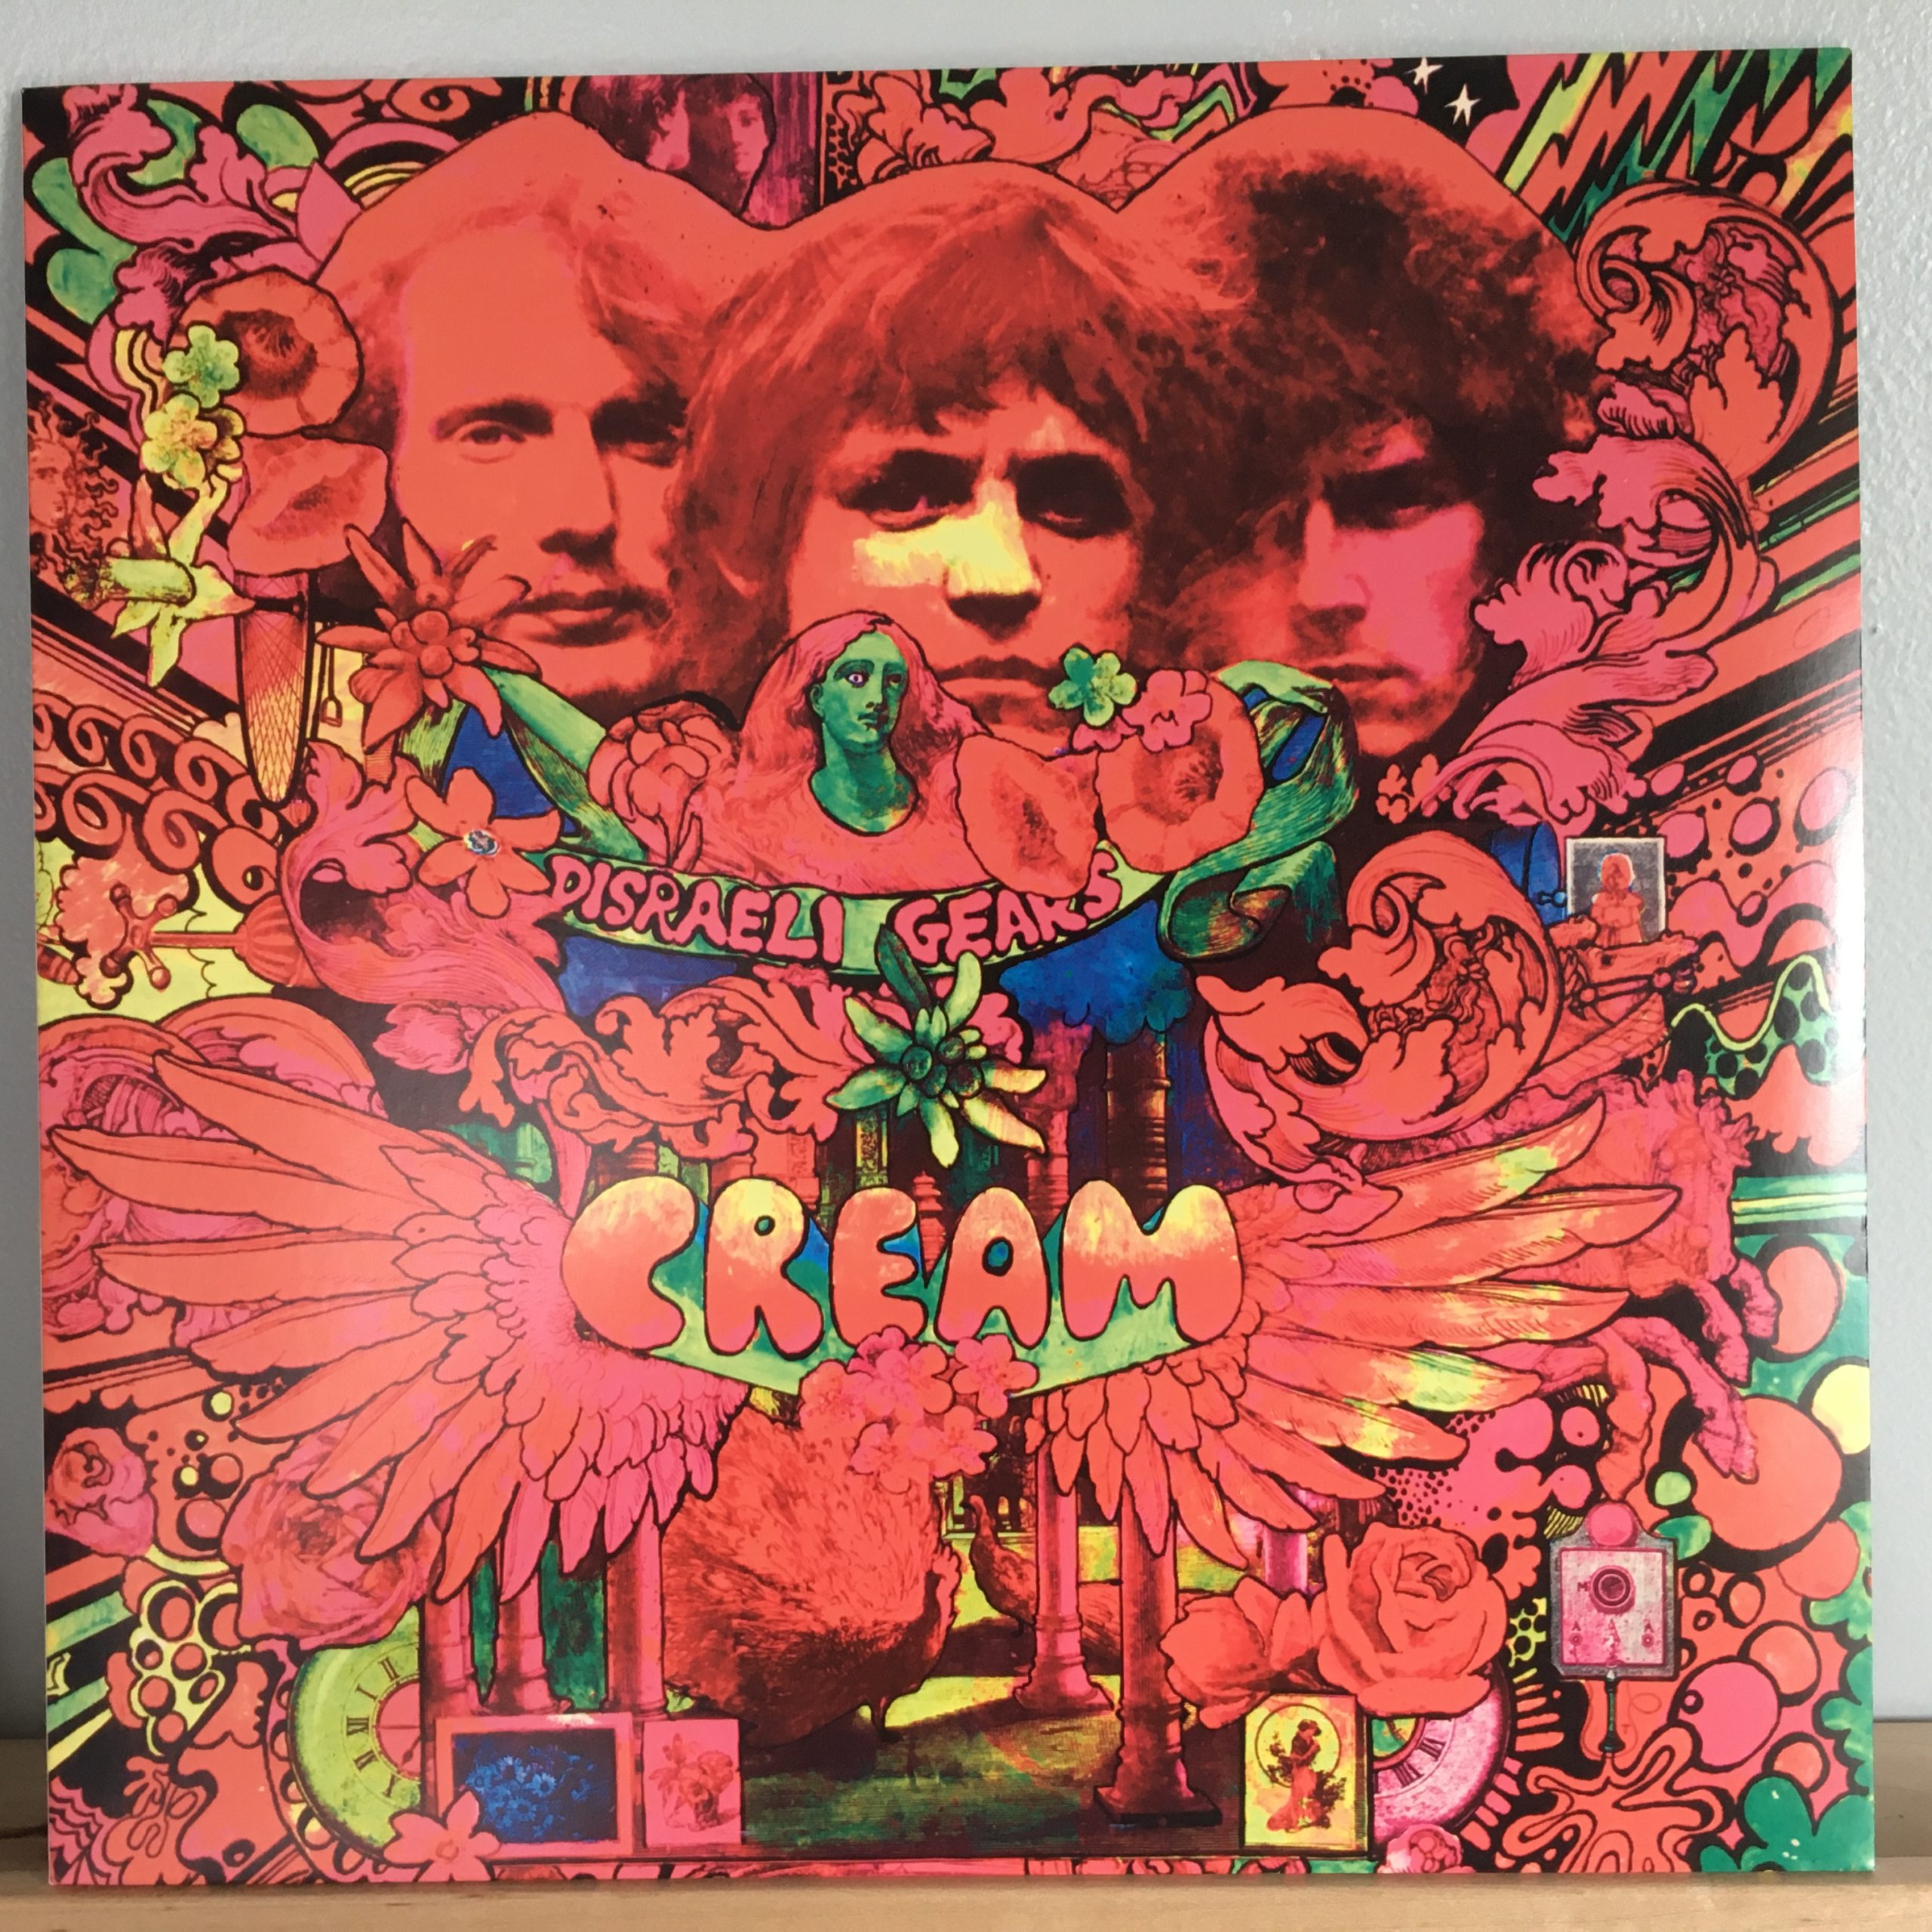 Disraeli Gears front cover